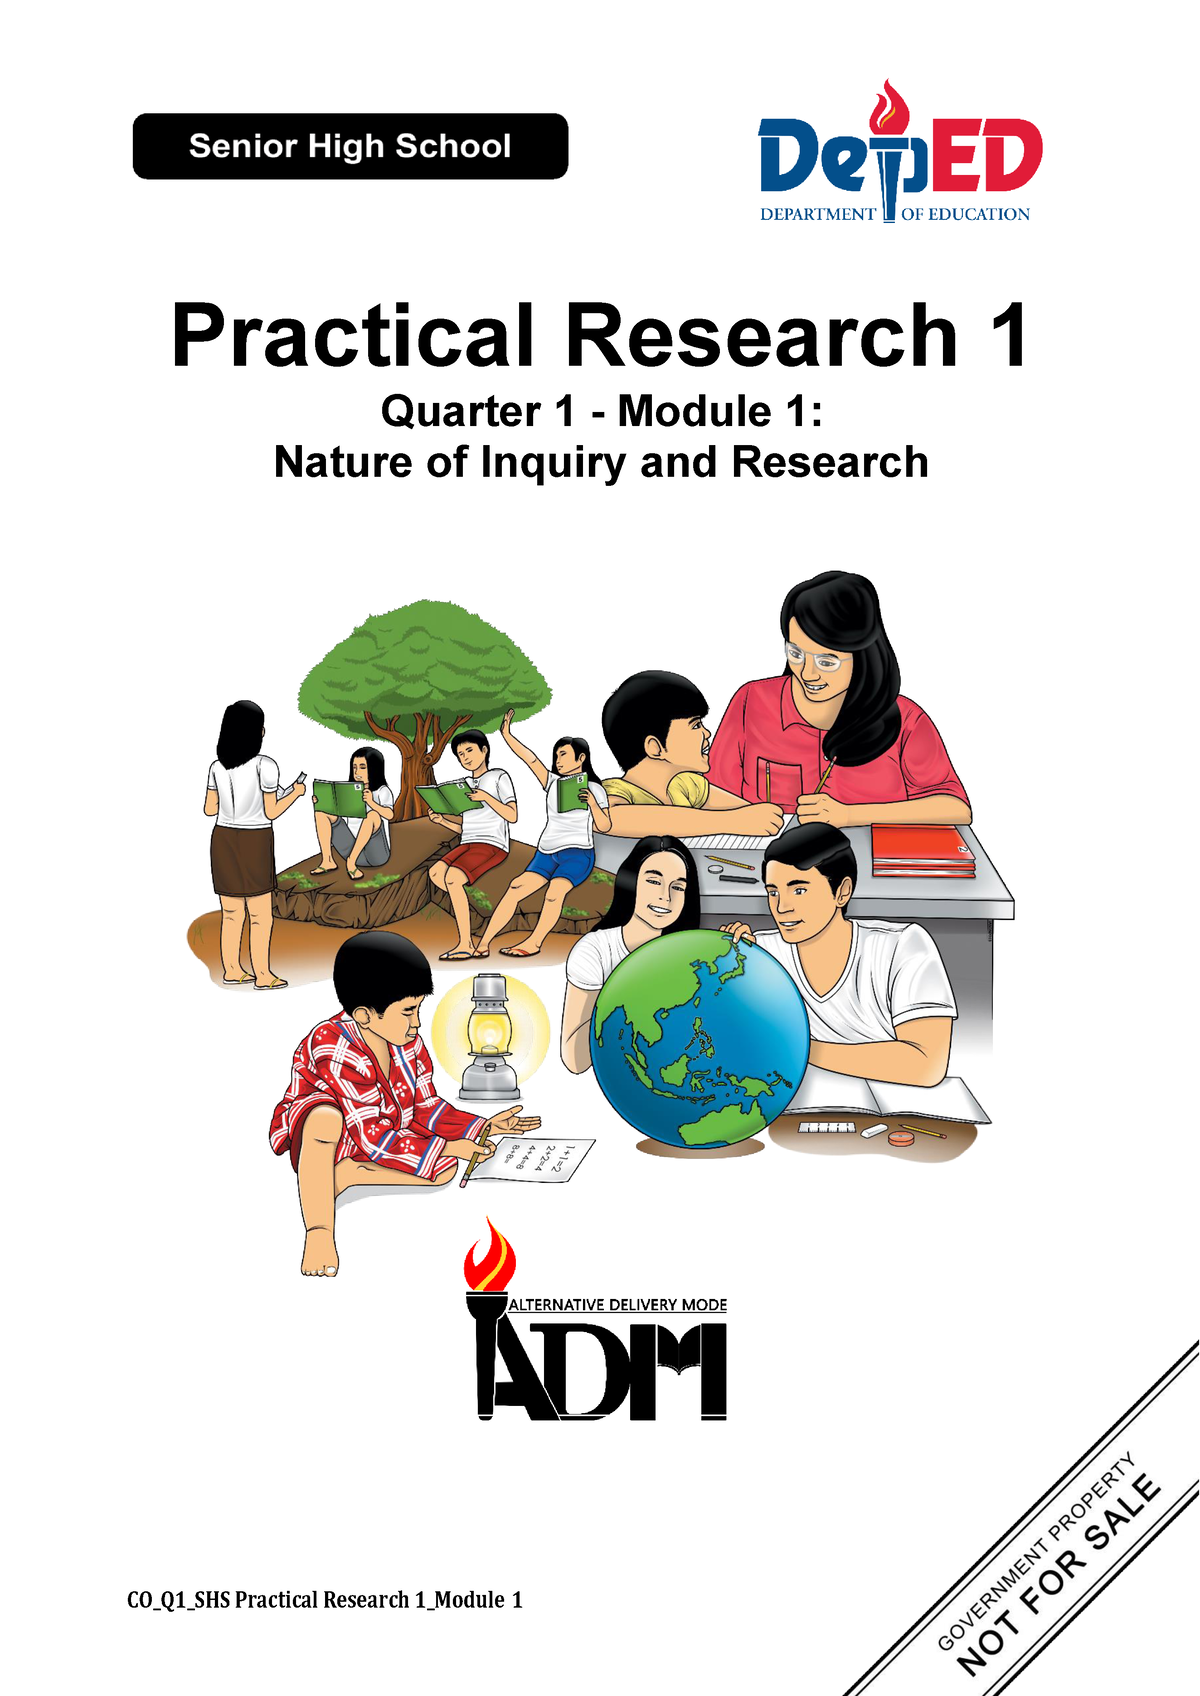 what is literature in practical research